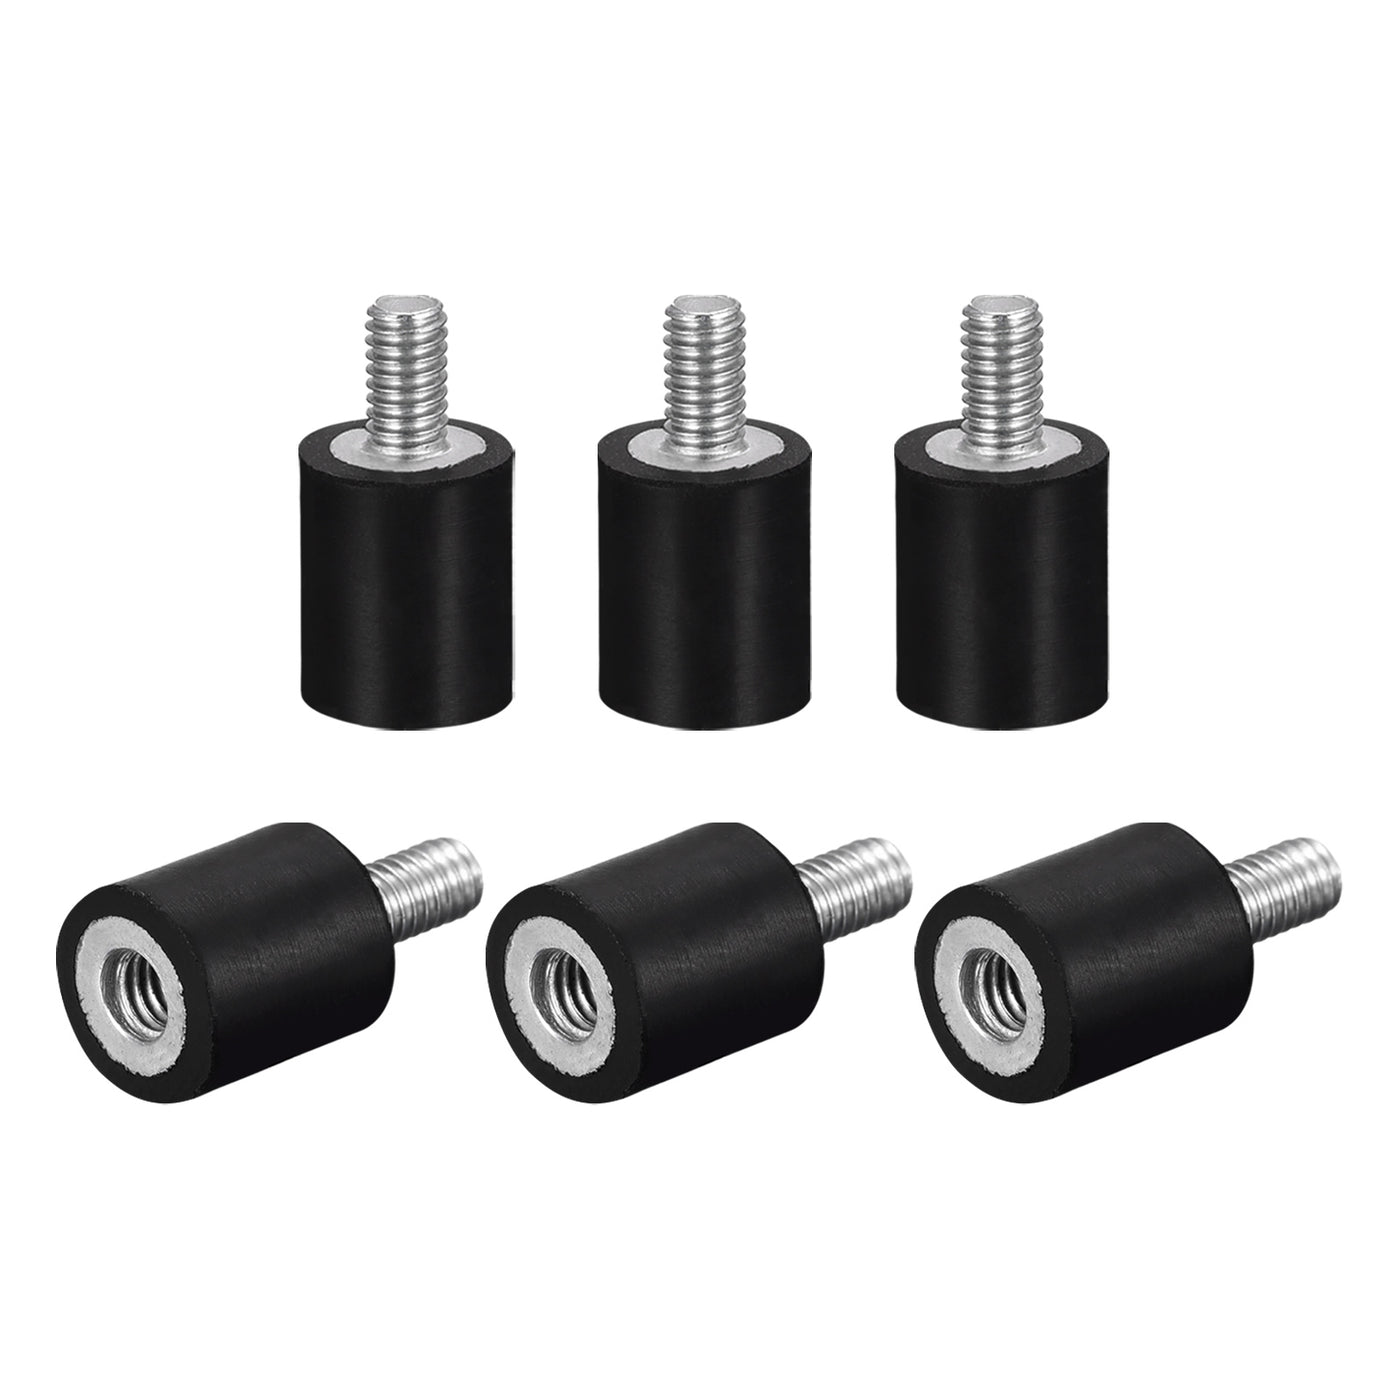 uxcell Uxcell Rubber Mount 6pcs M4 Male/Female Vibration Isolator Shock Absorber, D10mmxH10mm